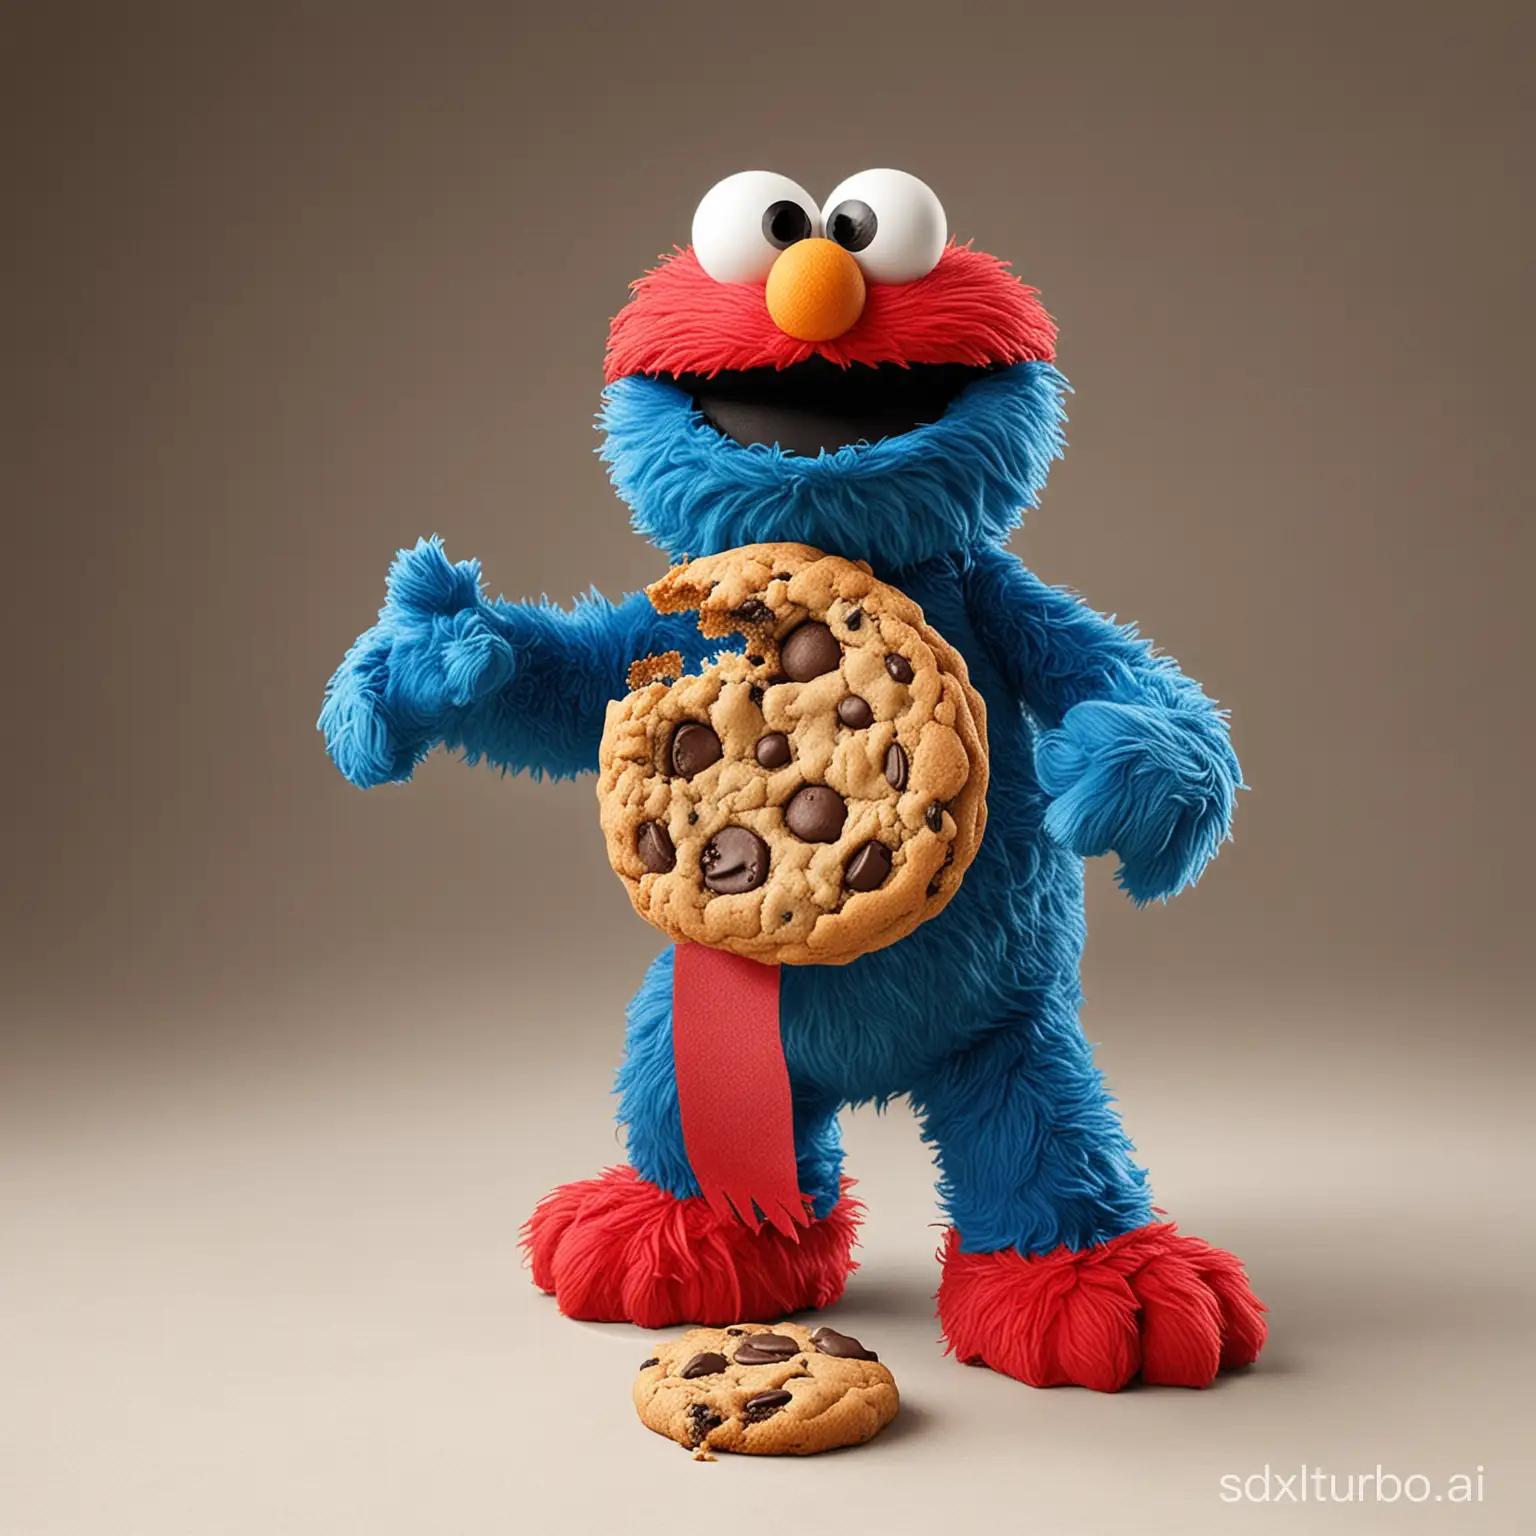 Elmo and Cookie Monster combine together